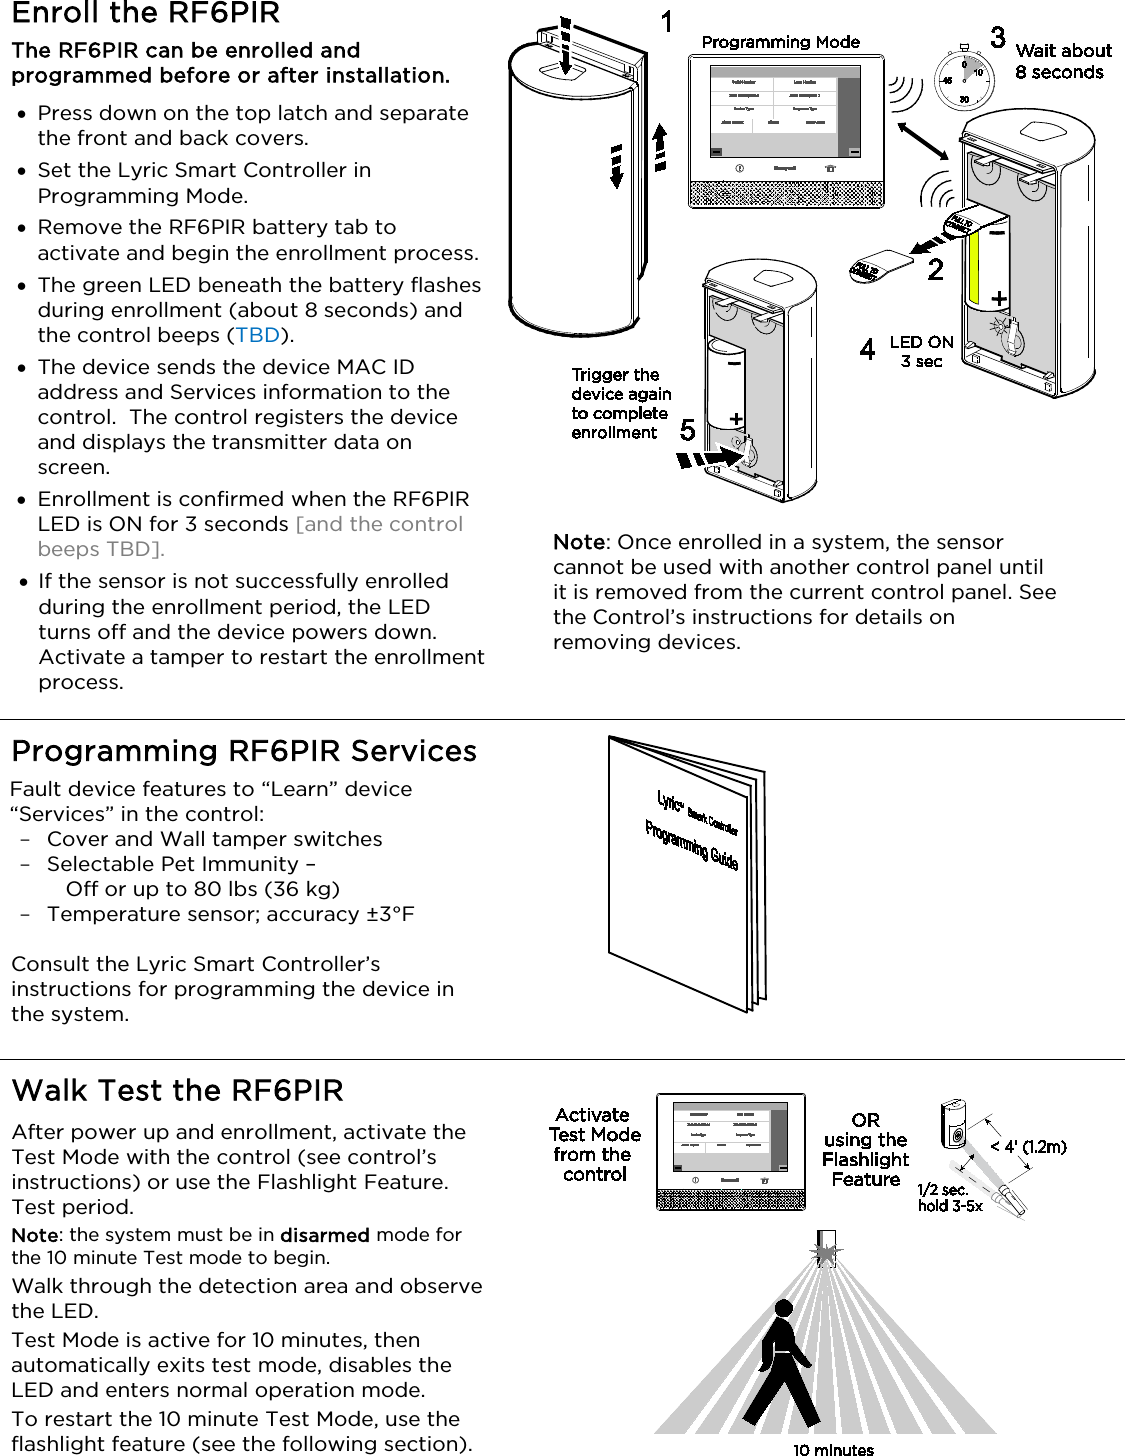   Enroll the RF6PIR  The RF6PIR can be enrolled and programmed before or after installation.  • Press down on the top latch and separate the front and back covers. • Set the Lyric Smart Controller in Programming Mode. • Remove the RF6PIR battery tab to activate and begin the enrollment process. • The green LED beneath the battery flashes during enrollment (about 8 seconds) and the control beeps (TBD).  • The device sends the device MAC ID address and Services information to the control.  The control registers the device and displays the transmitter data on screen. • Enrollment is confirmed when the RF6PIR LED is ON for 3 seconds [and the control beeps TBD].  • If the sensor is not successfully enrolled during the enrollment period, the LED turns off and the device powers down.  Activate a tamper to restart the enrollment process.  Note: Once enrolled in a system, the sensor cannot be used with another control panel until it is removed from the current control panel. See the Control’s instructions for details on removing devices.  Programming RF6PIR Services Fault device features to “Learn” device “Services” in the control:  - Cover and Wall tamper switches - Selectable Pet Immunity –     Off or up to 80 lbs (36 kg) - Temperature sensor; accuracy ±3°F    Consult the Lyric Smart Controller’s instructions for programming the device in the system.                       Walk Test the RF6PIR After power up and enrollment, activate the Test Mode with the control (see control’s instructions) or use the Flashlight Feature. Test period. Note: the system must be in disarmed mode for the 10 minute Test mode to begin. Walk through the detection area and observe the LED. Test Mode is active for 10 minutes, then automatically exits test mode, disables the LED and enters normal operation mode. To restart the 10 minute Test Mode, use the flashlight feature (see the following section).   